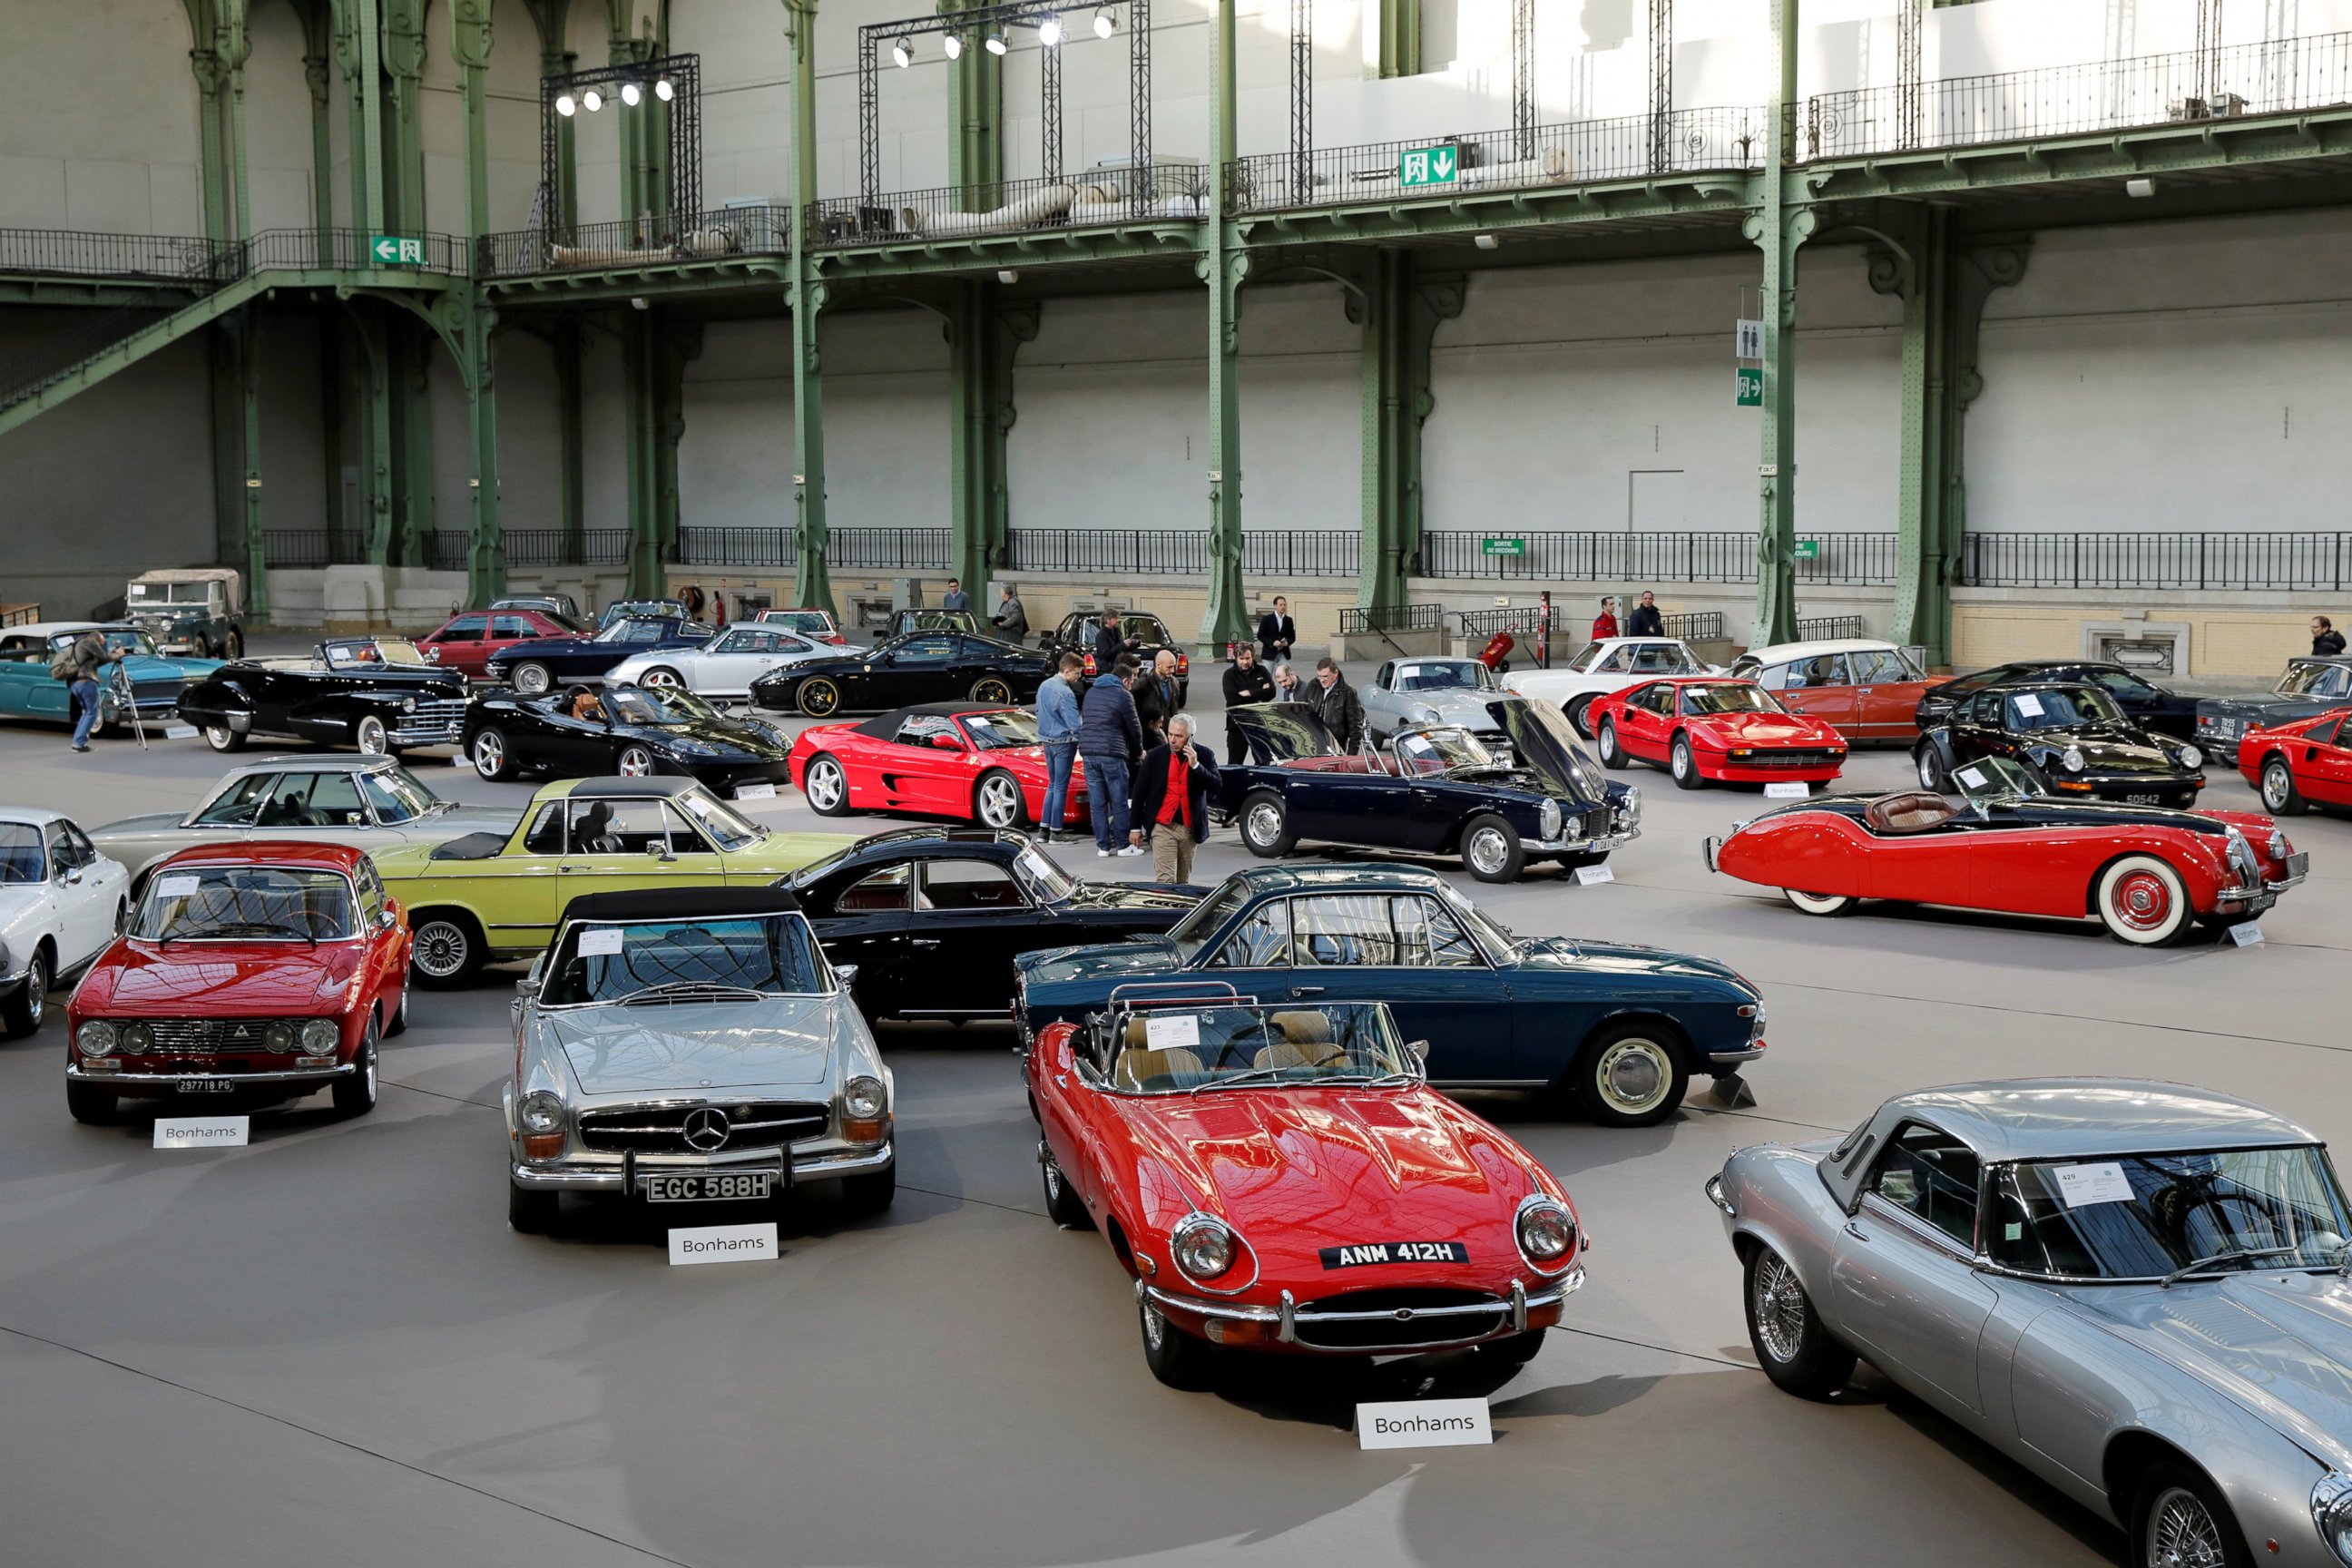 PHOTO: Vintage and classic cars are displayed by Bonhams auction house at the Grand Palais exhibition hall during the Retromobile week in Paris, France, Feb. 8, 2017.